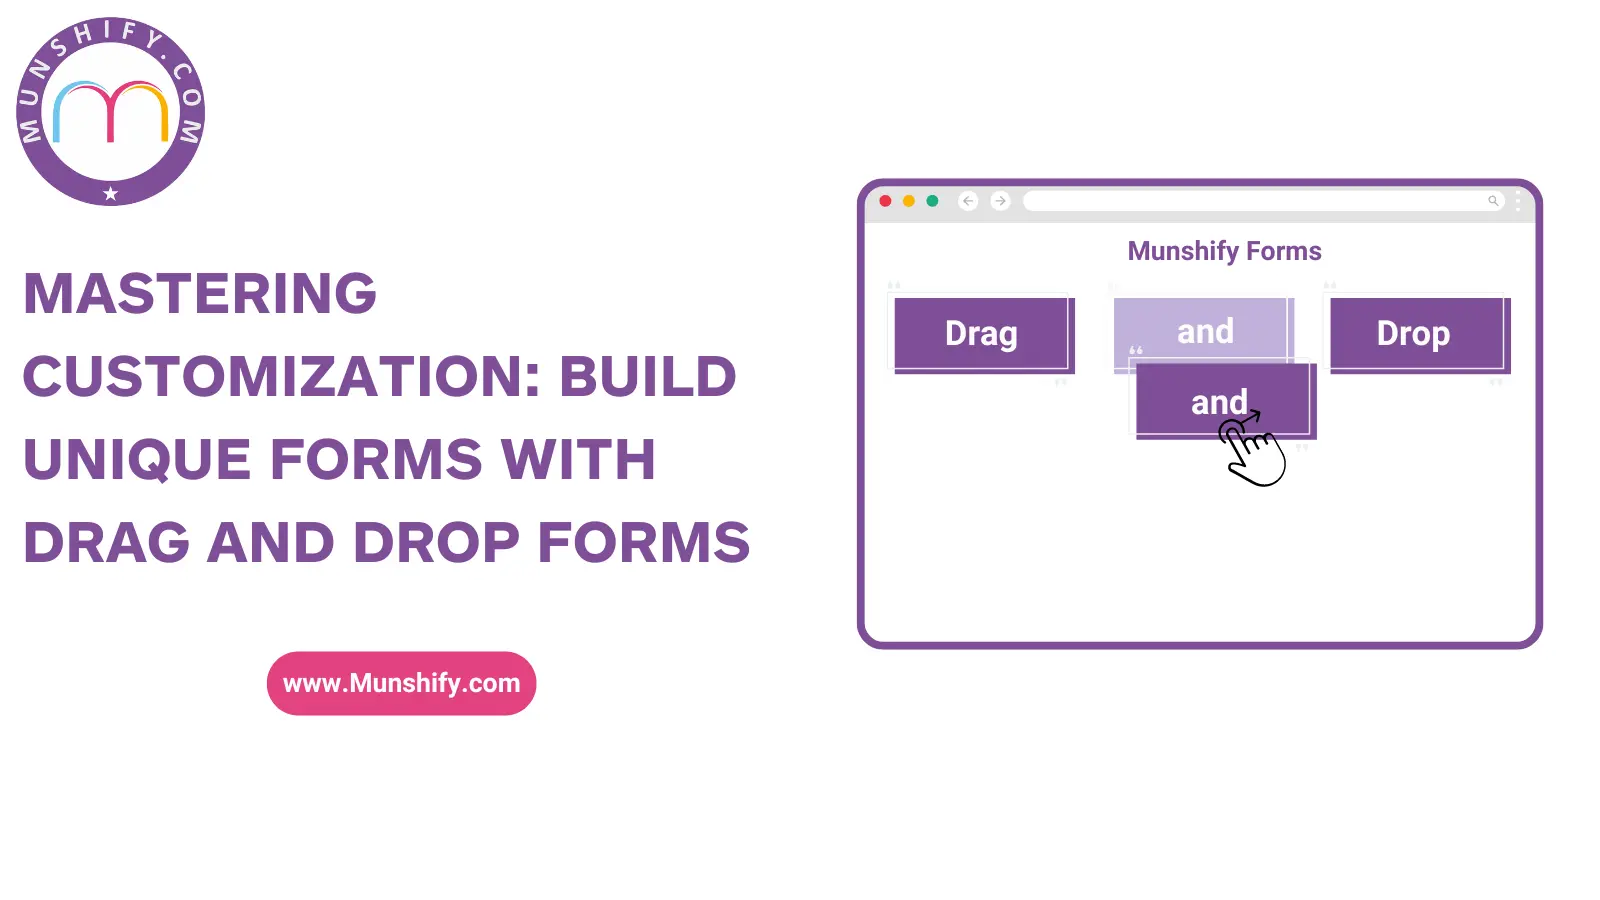 Drag and Drop Forms